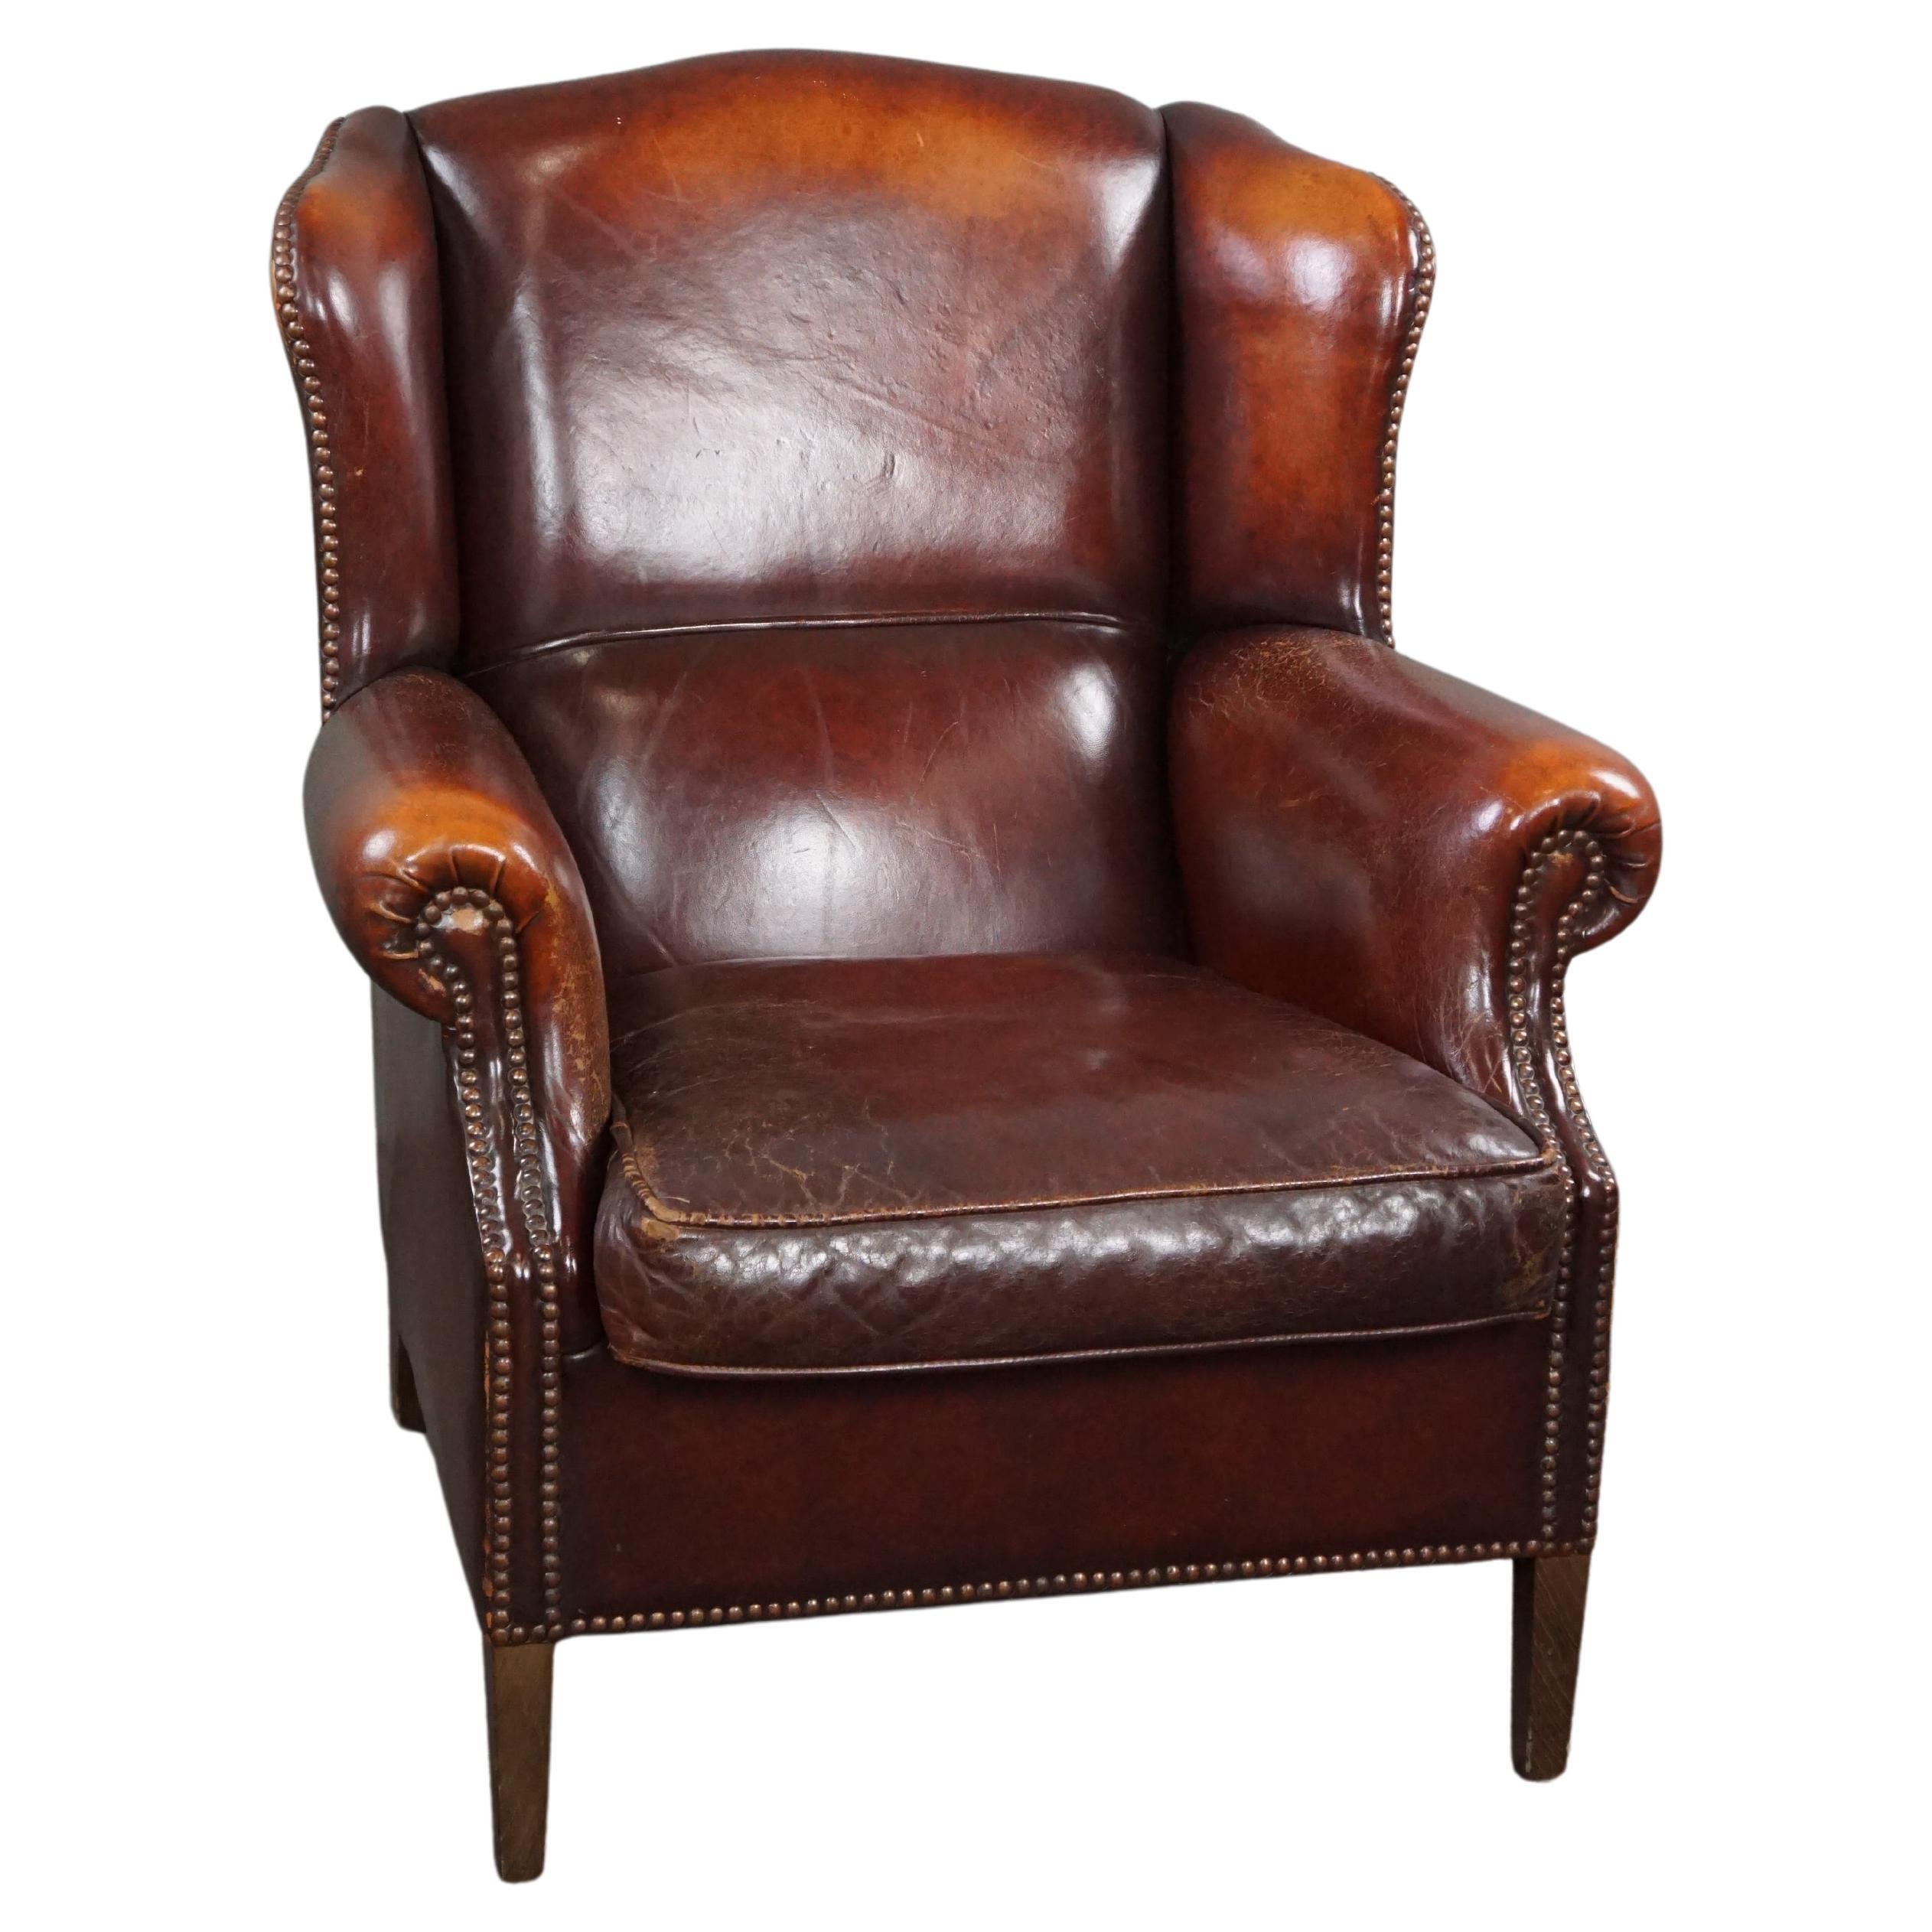 Warm brown sheep leather wing chair with character For Sale